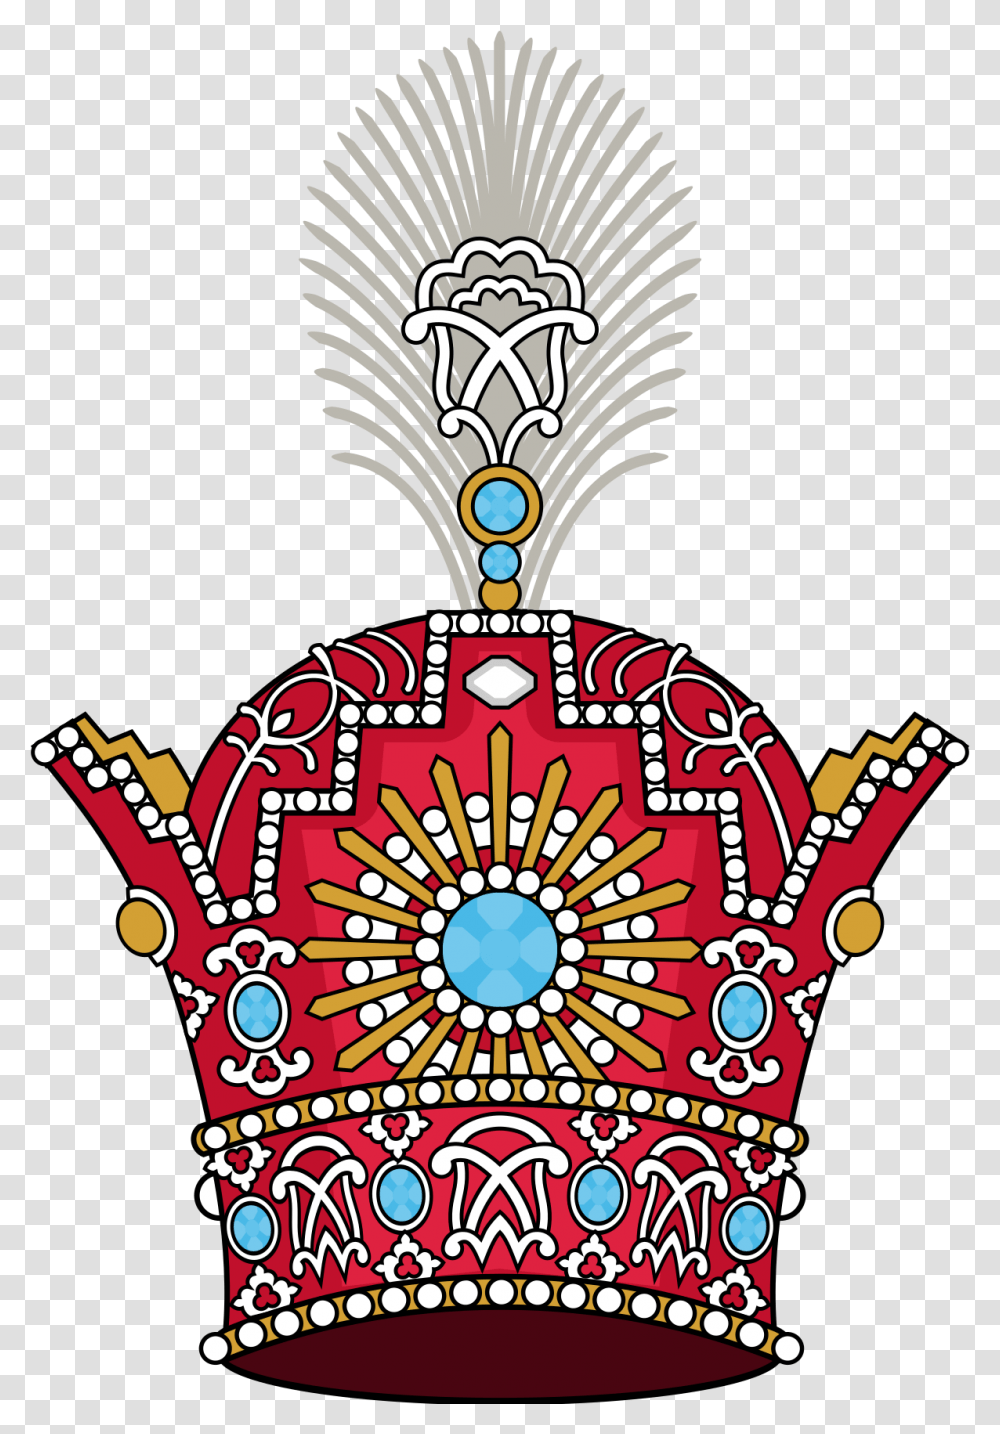 King Of Kings Wikipedia Football Federation Islamic Republic Of Iran, Crown, Jewelry, Accessories, Accessory Transparent Png